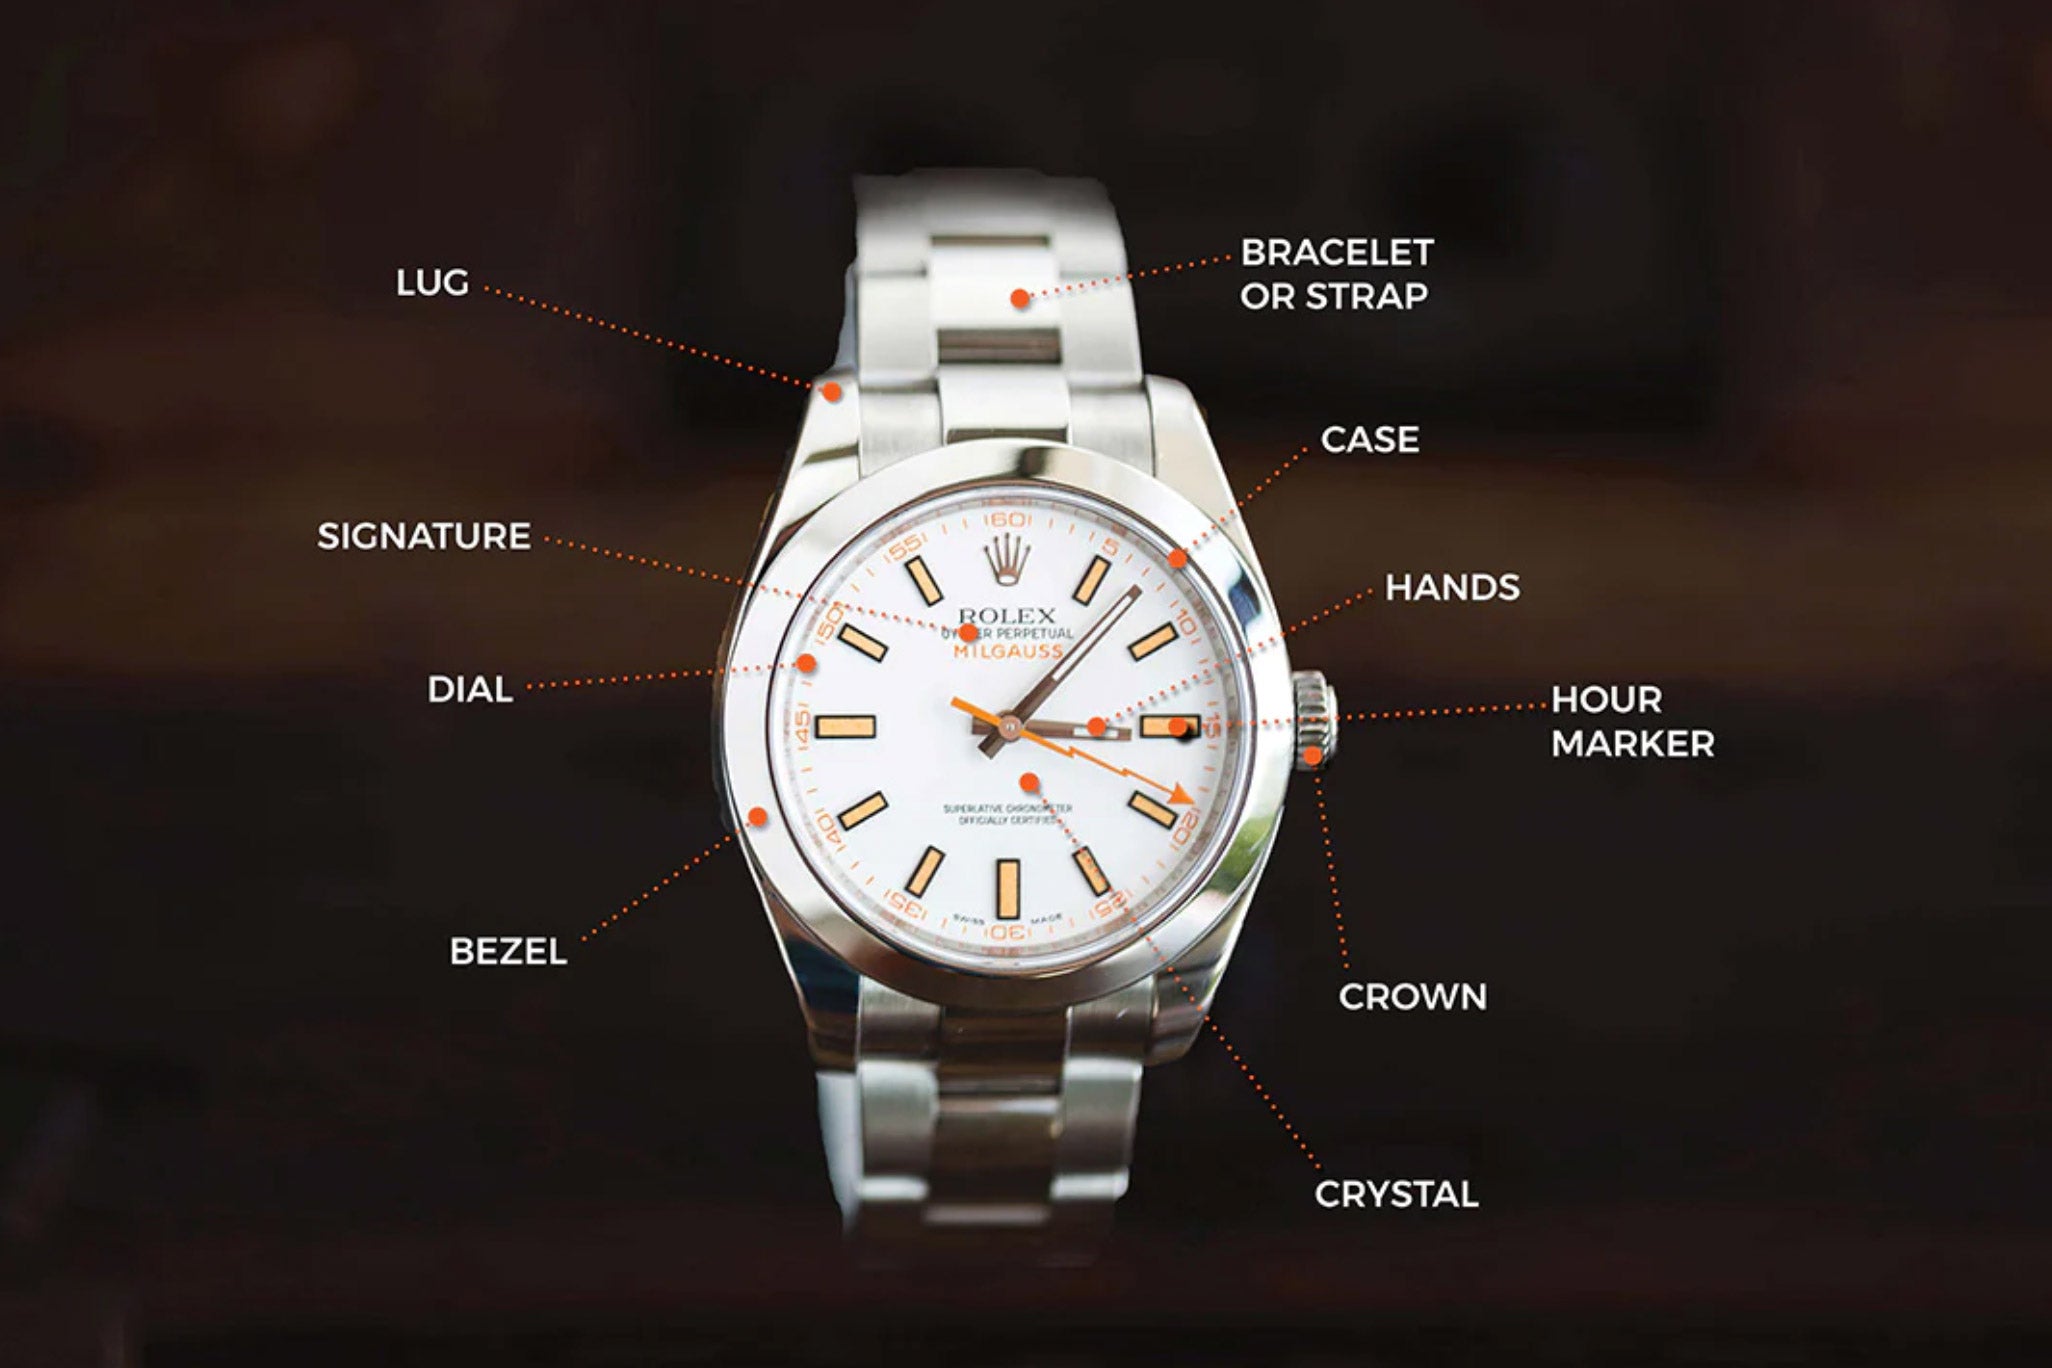 The main parts of a watch